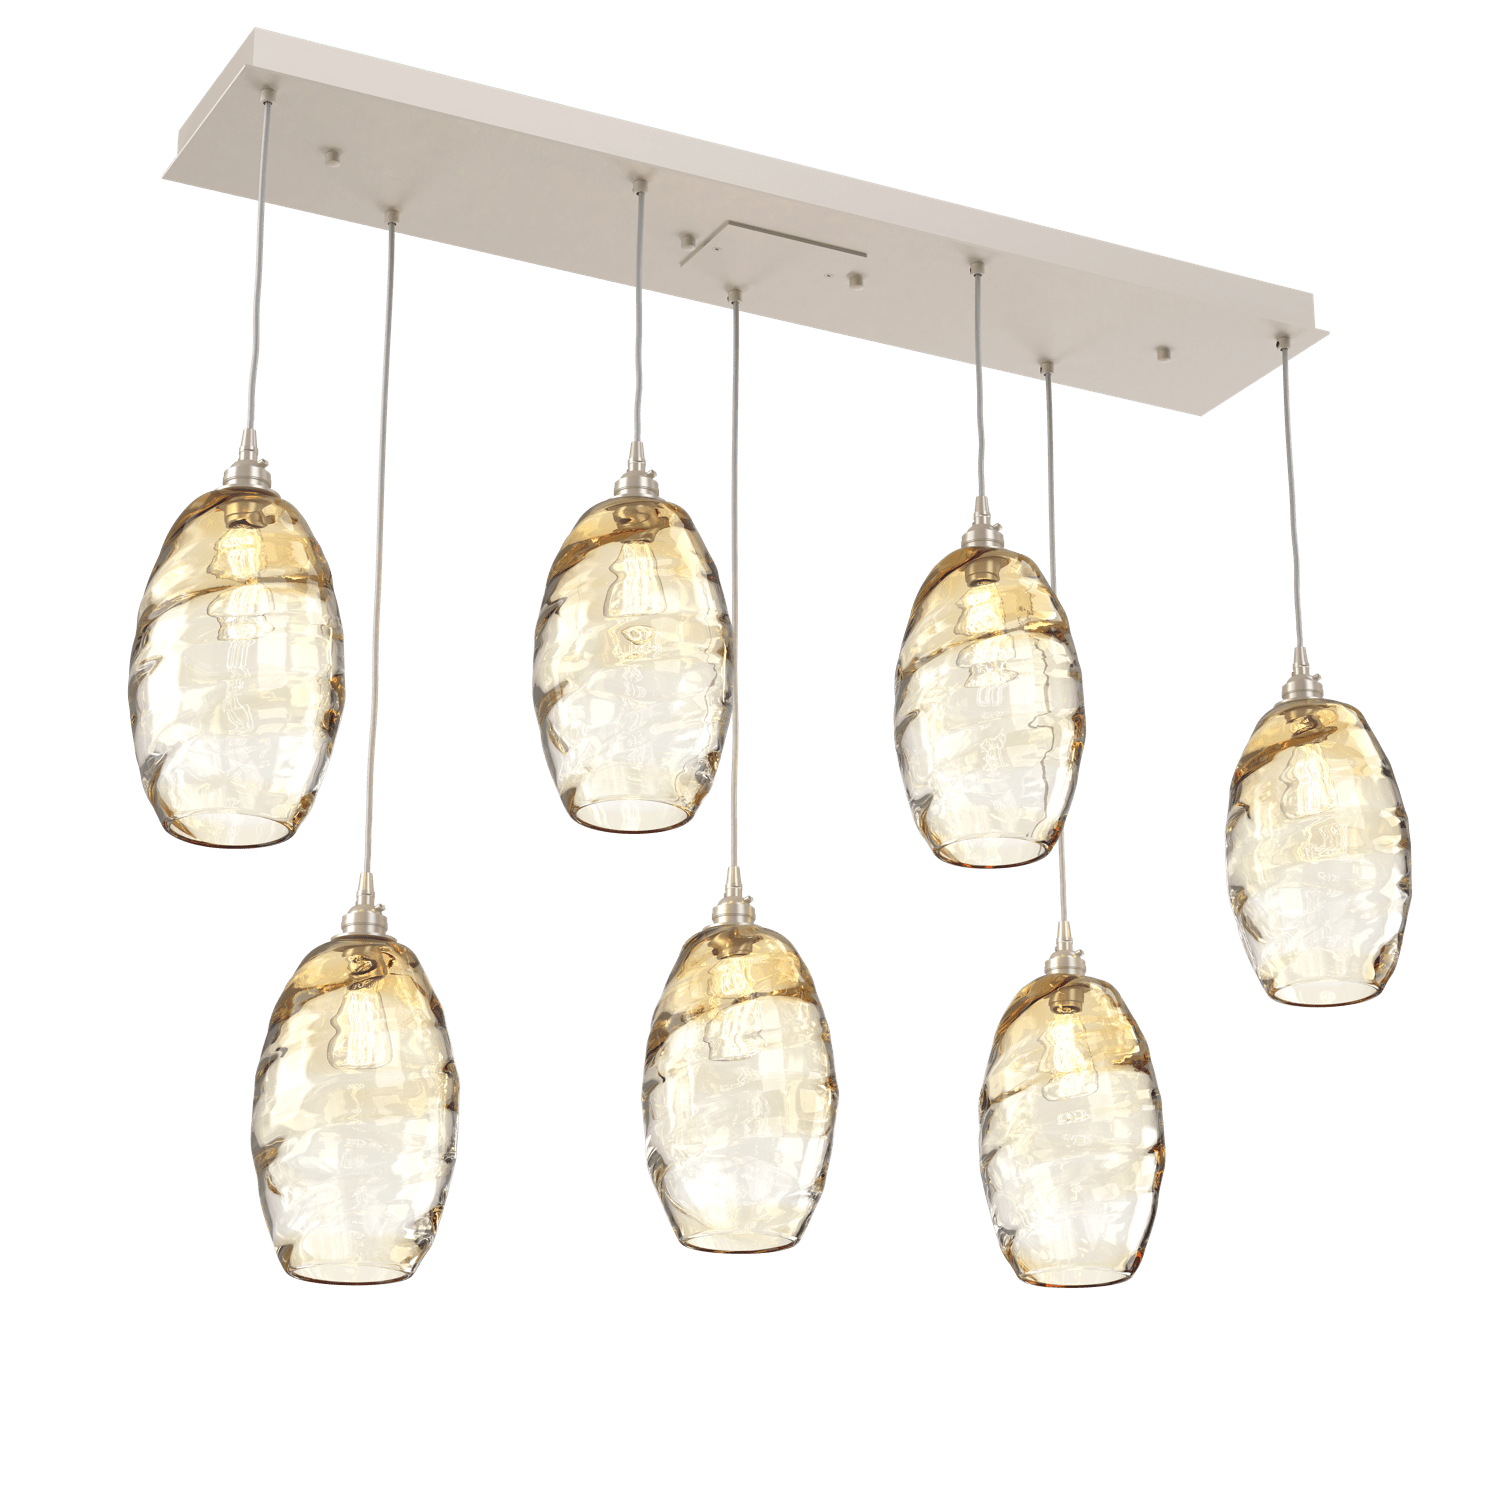 PLB0035-07-BS-OA-Hammerton-Studio-Optic-Blown-Glass-Elisse-7-light-linear-pendant-chandelier-with-metallic-beige-silver-finish-and-optic-amber-blown-glass-shades-and-incandescent-lamping